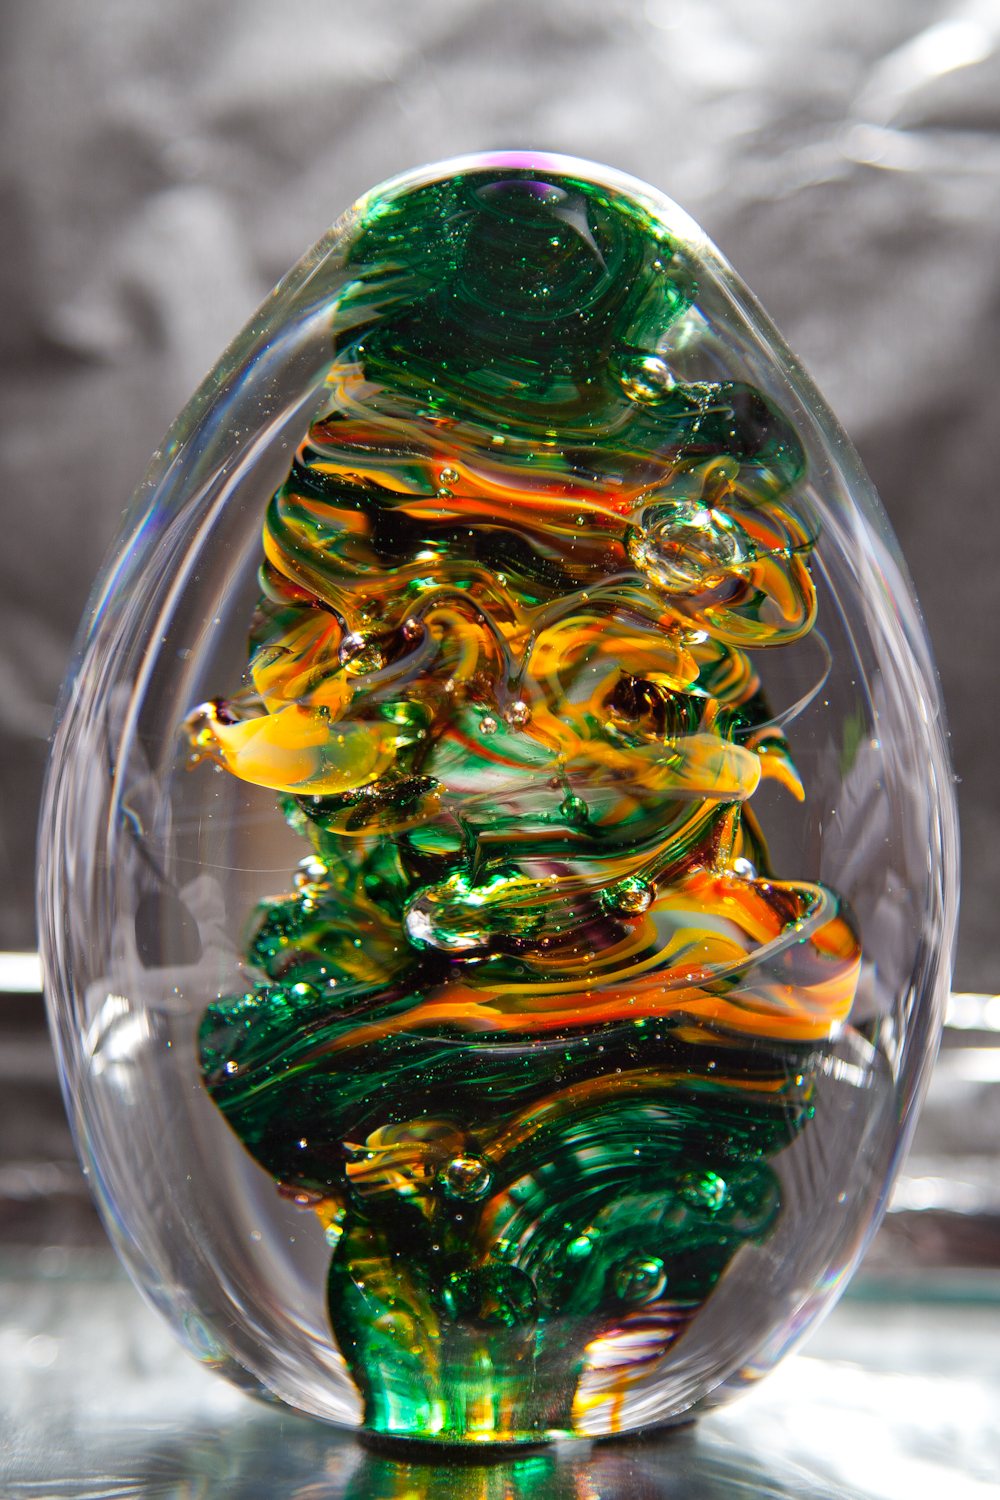 Artistic Renderings By David Patterson My Solid Glass Sculptures